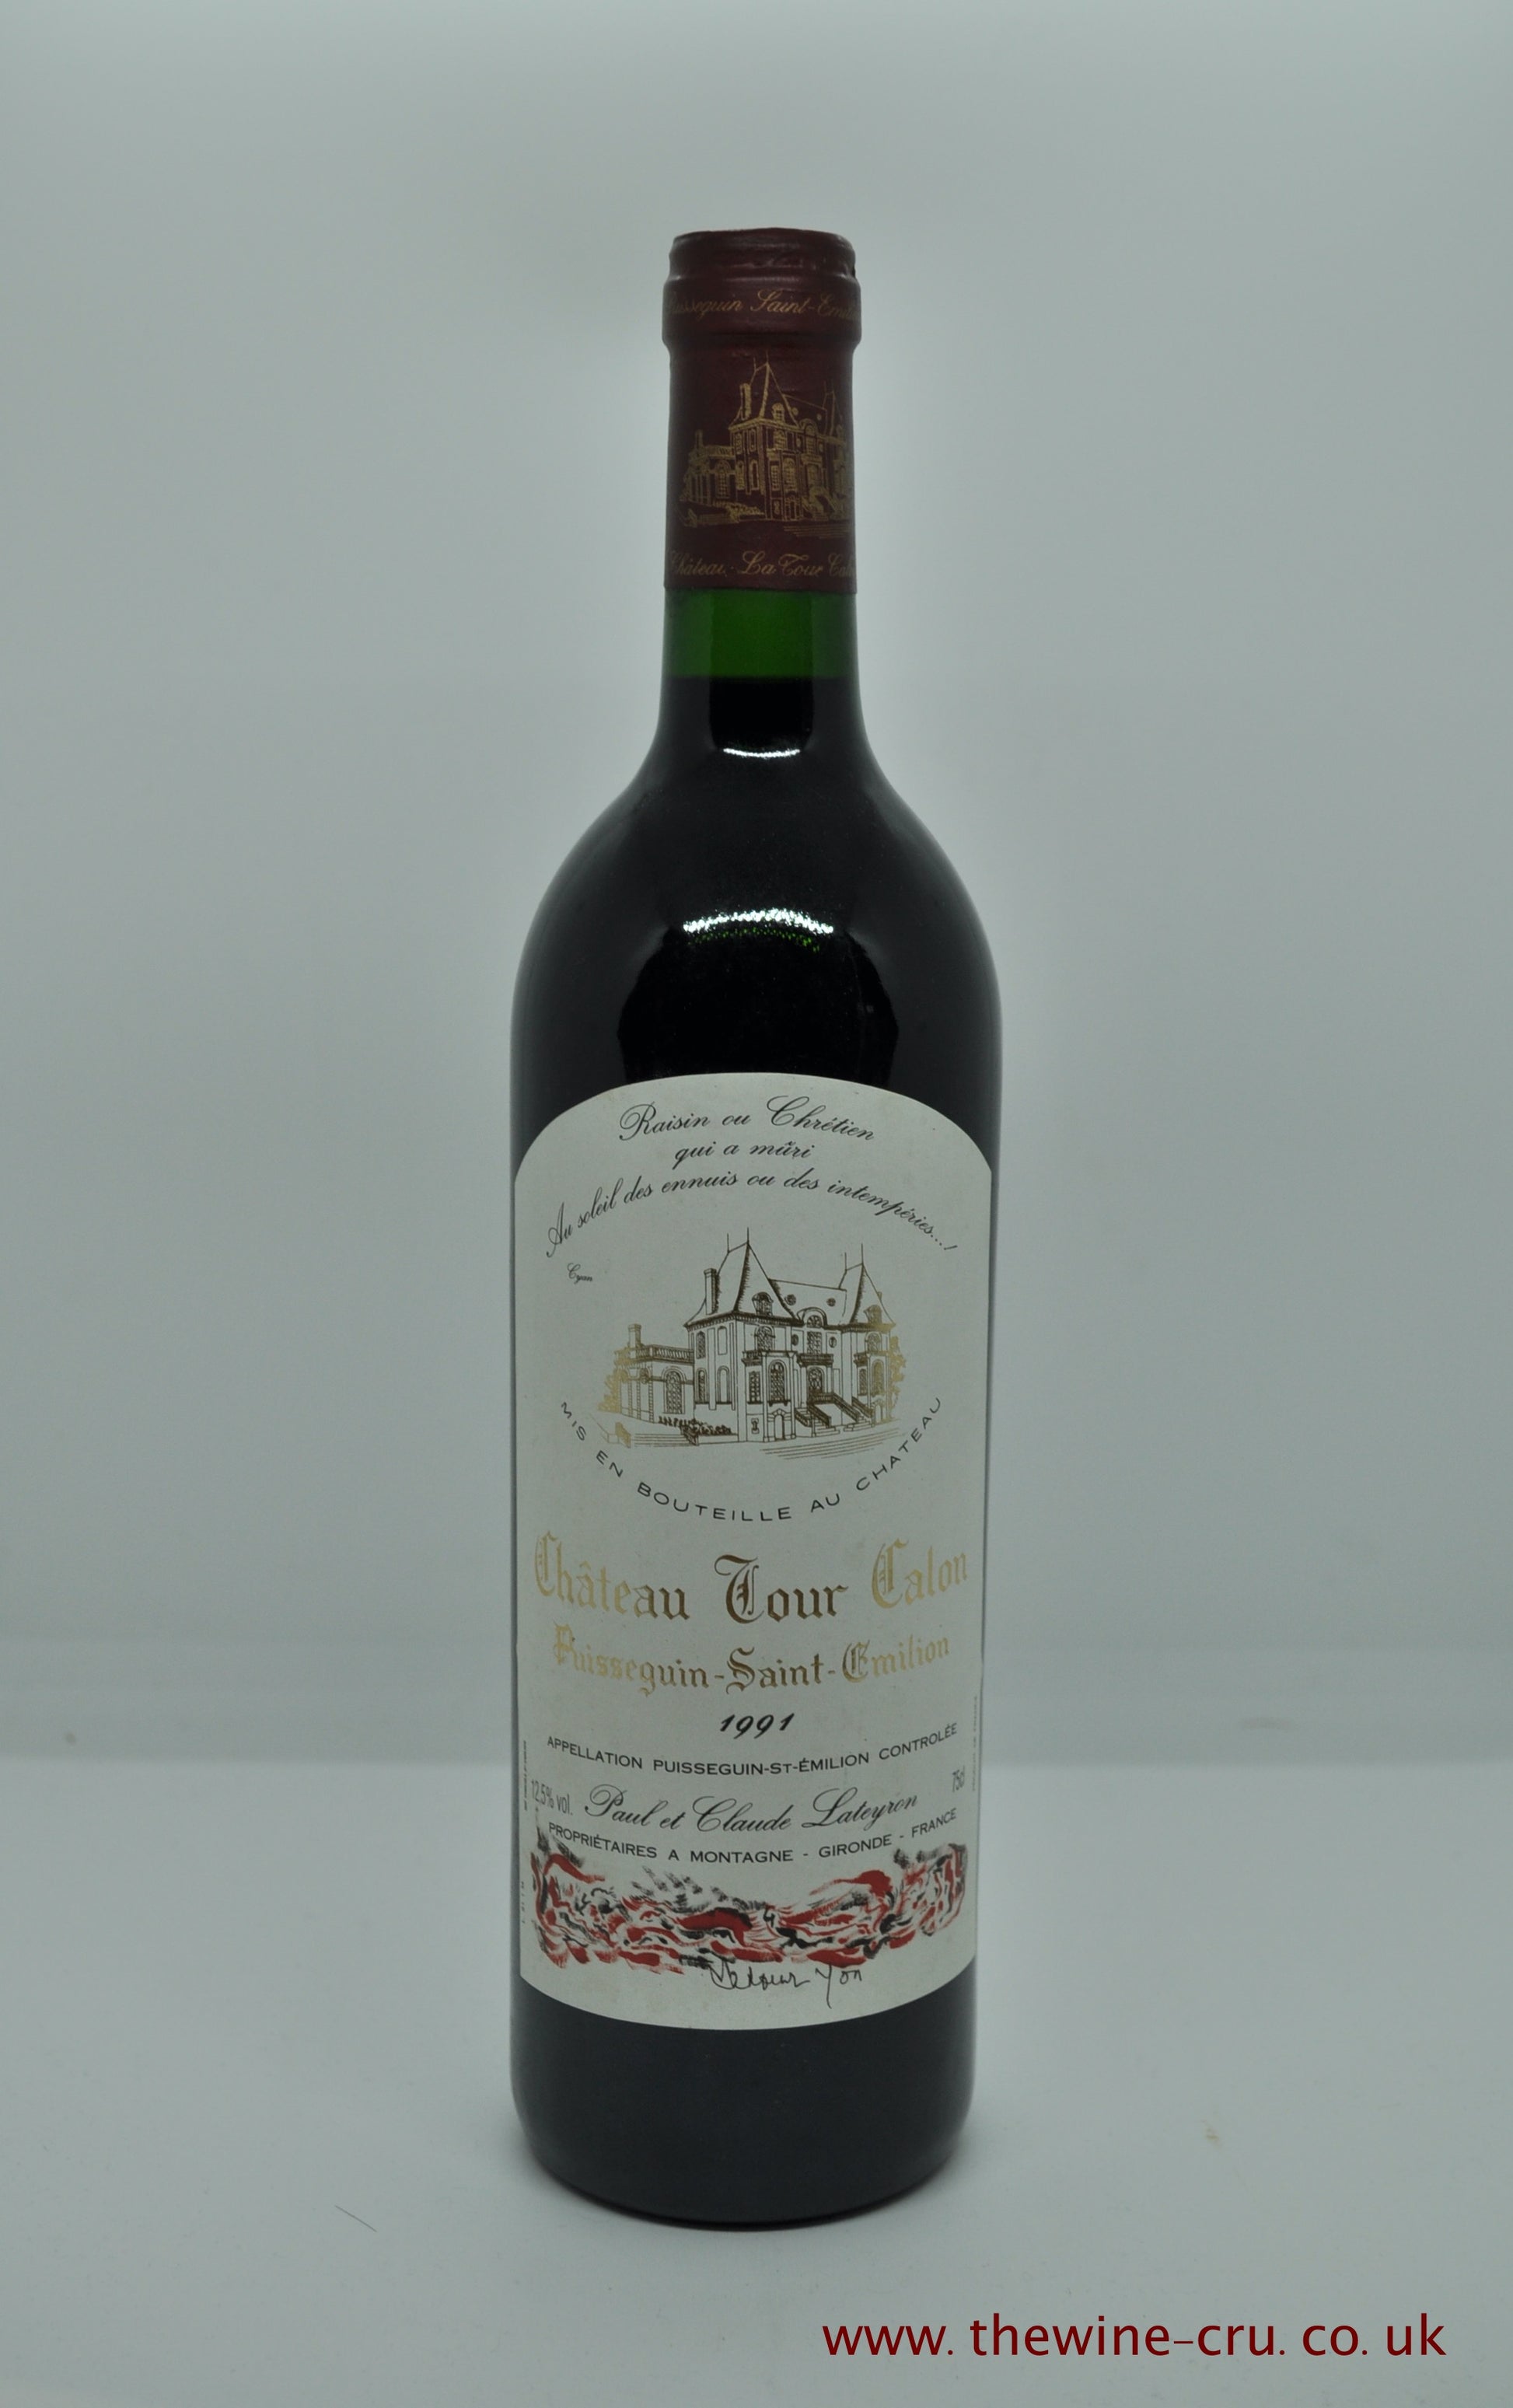 1991 vintage red wine. Chateau Tour Calon 1991 Puisseguin Saint Emilion, Bordeaux, France. The bottles are in good condition with the wine level being in neck. Immediate delivery. Free local delivery. Gift wrapping available.